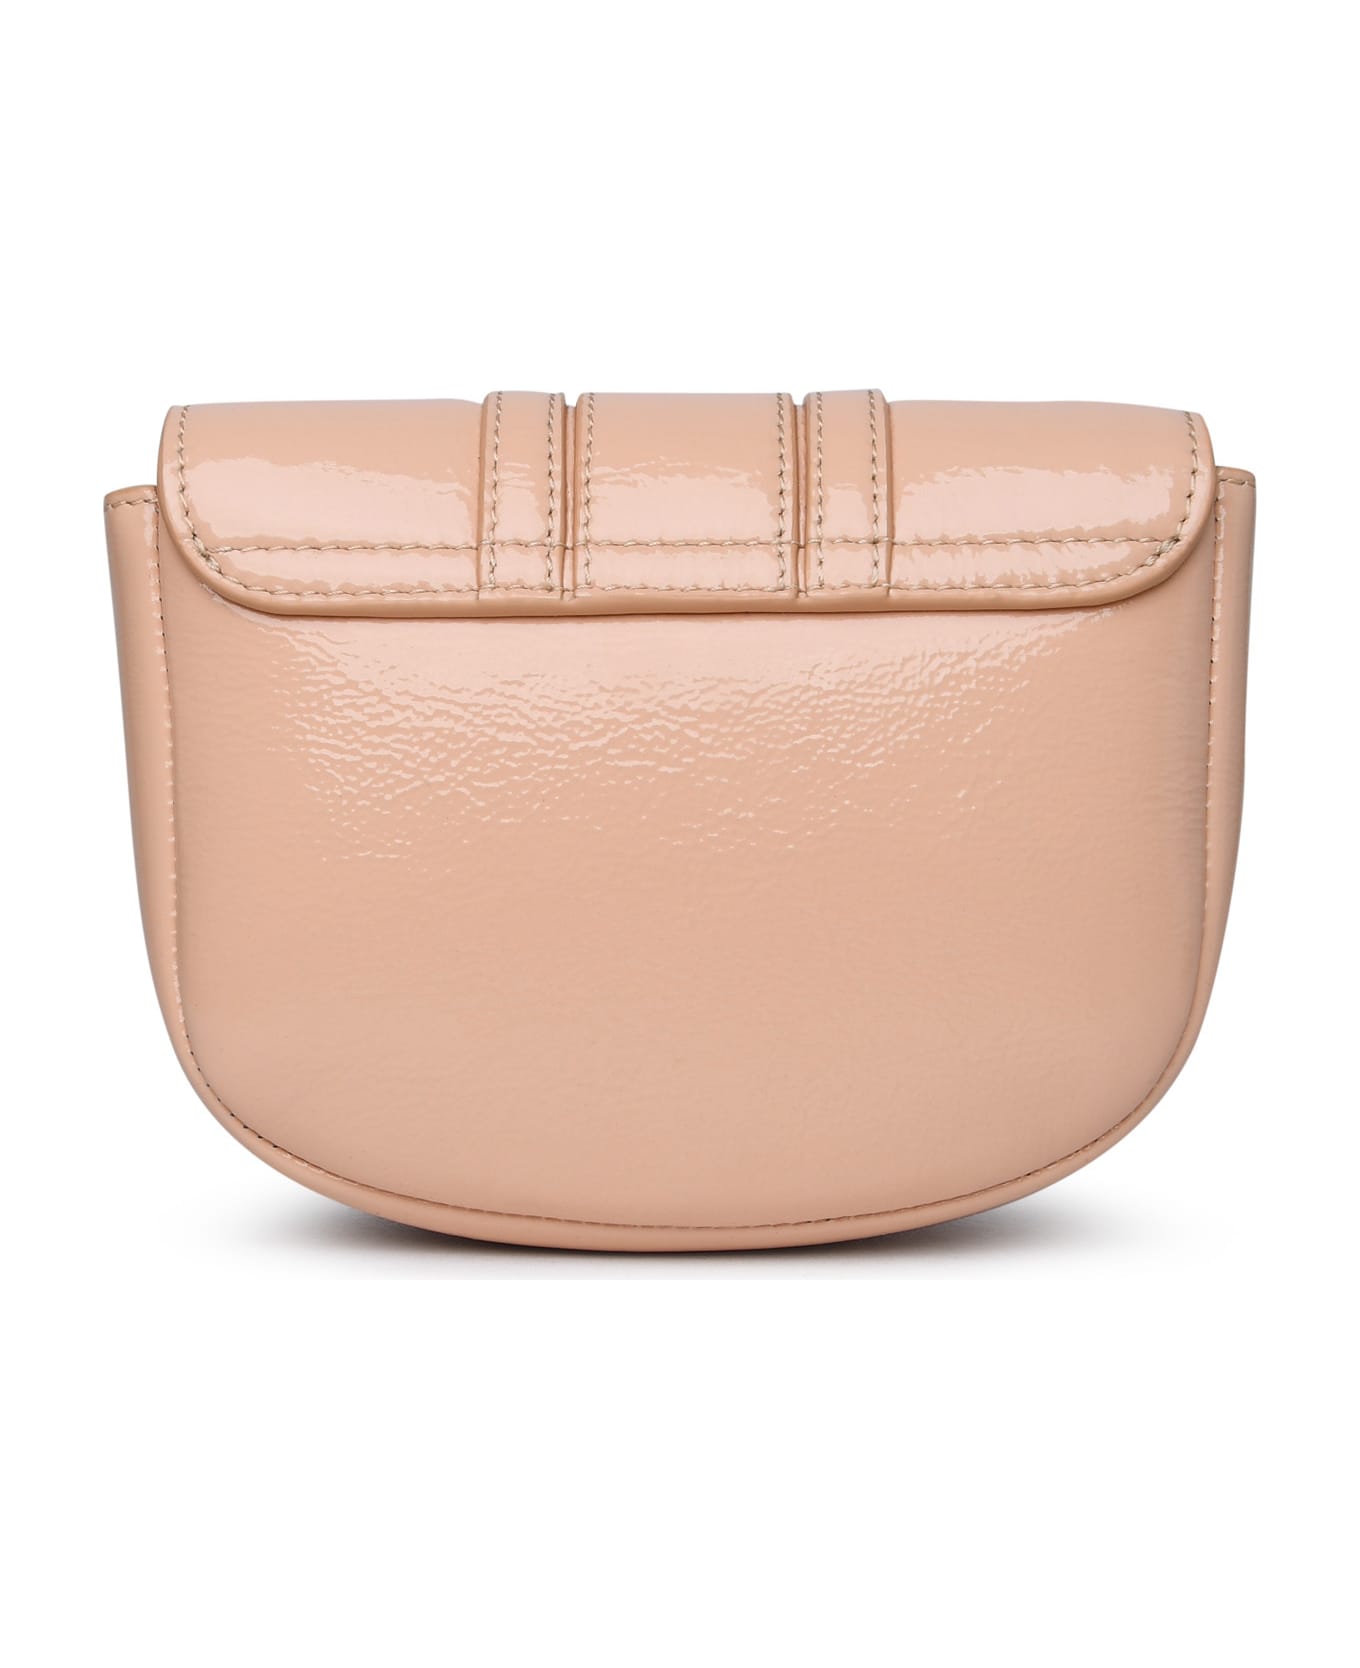 See by Chloé Pink Patent Leather Bag - Nude